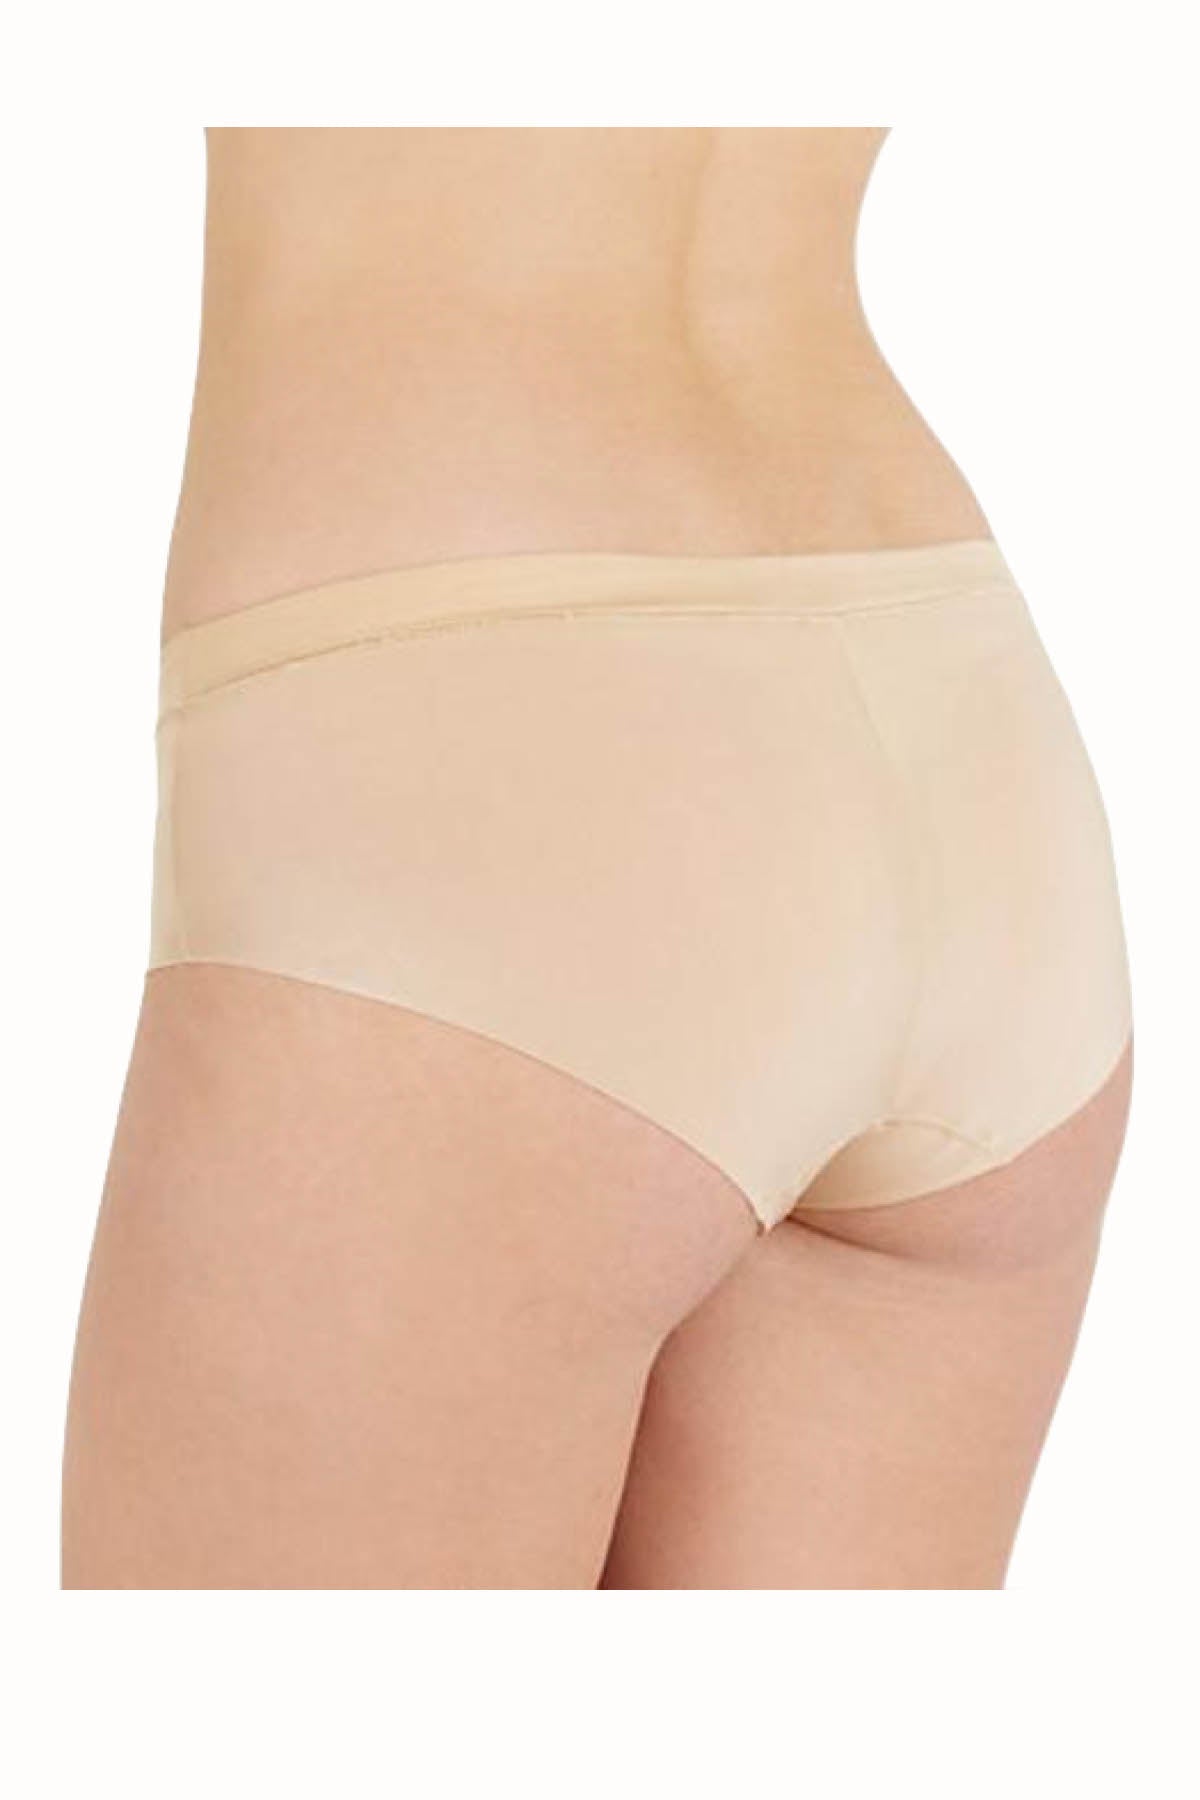 DKNY Beige Fusion Hipster Full Brief – CheapUndies